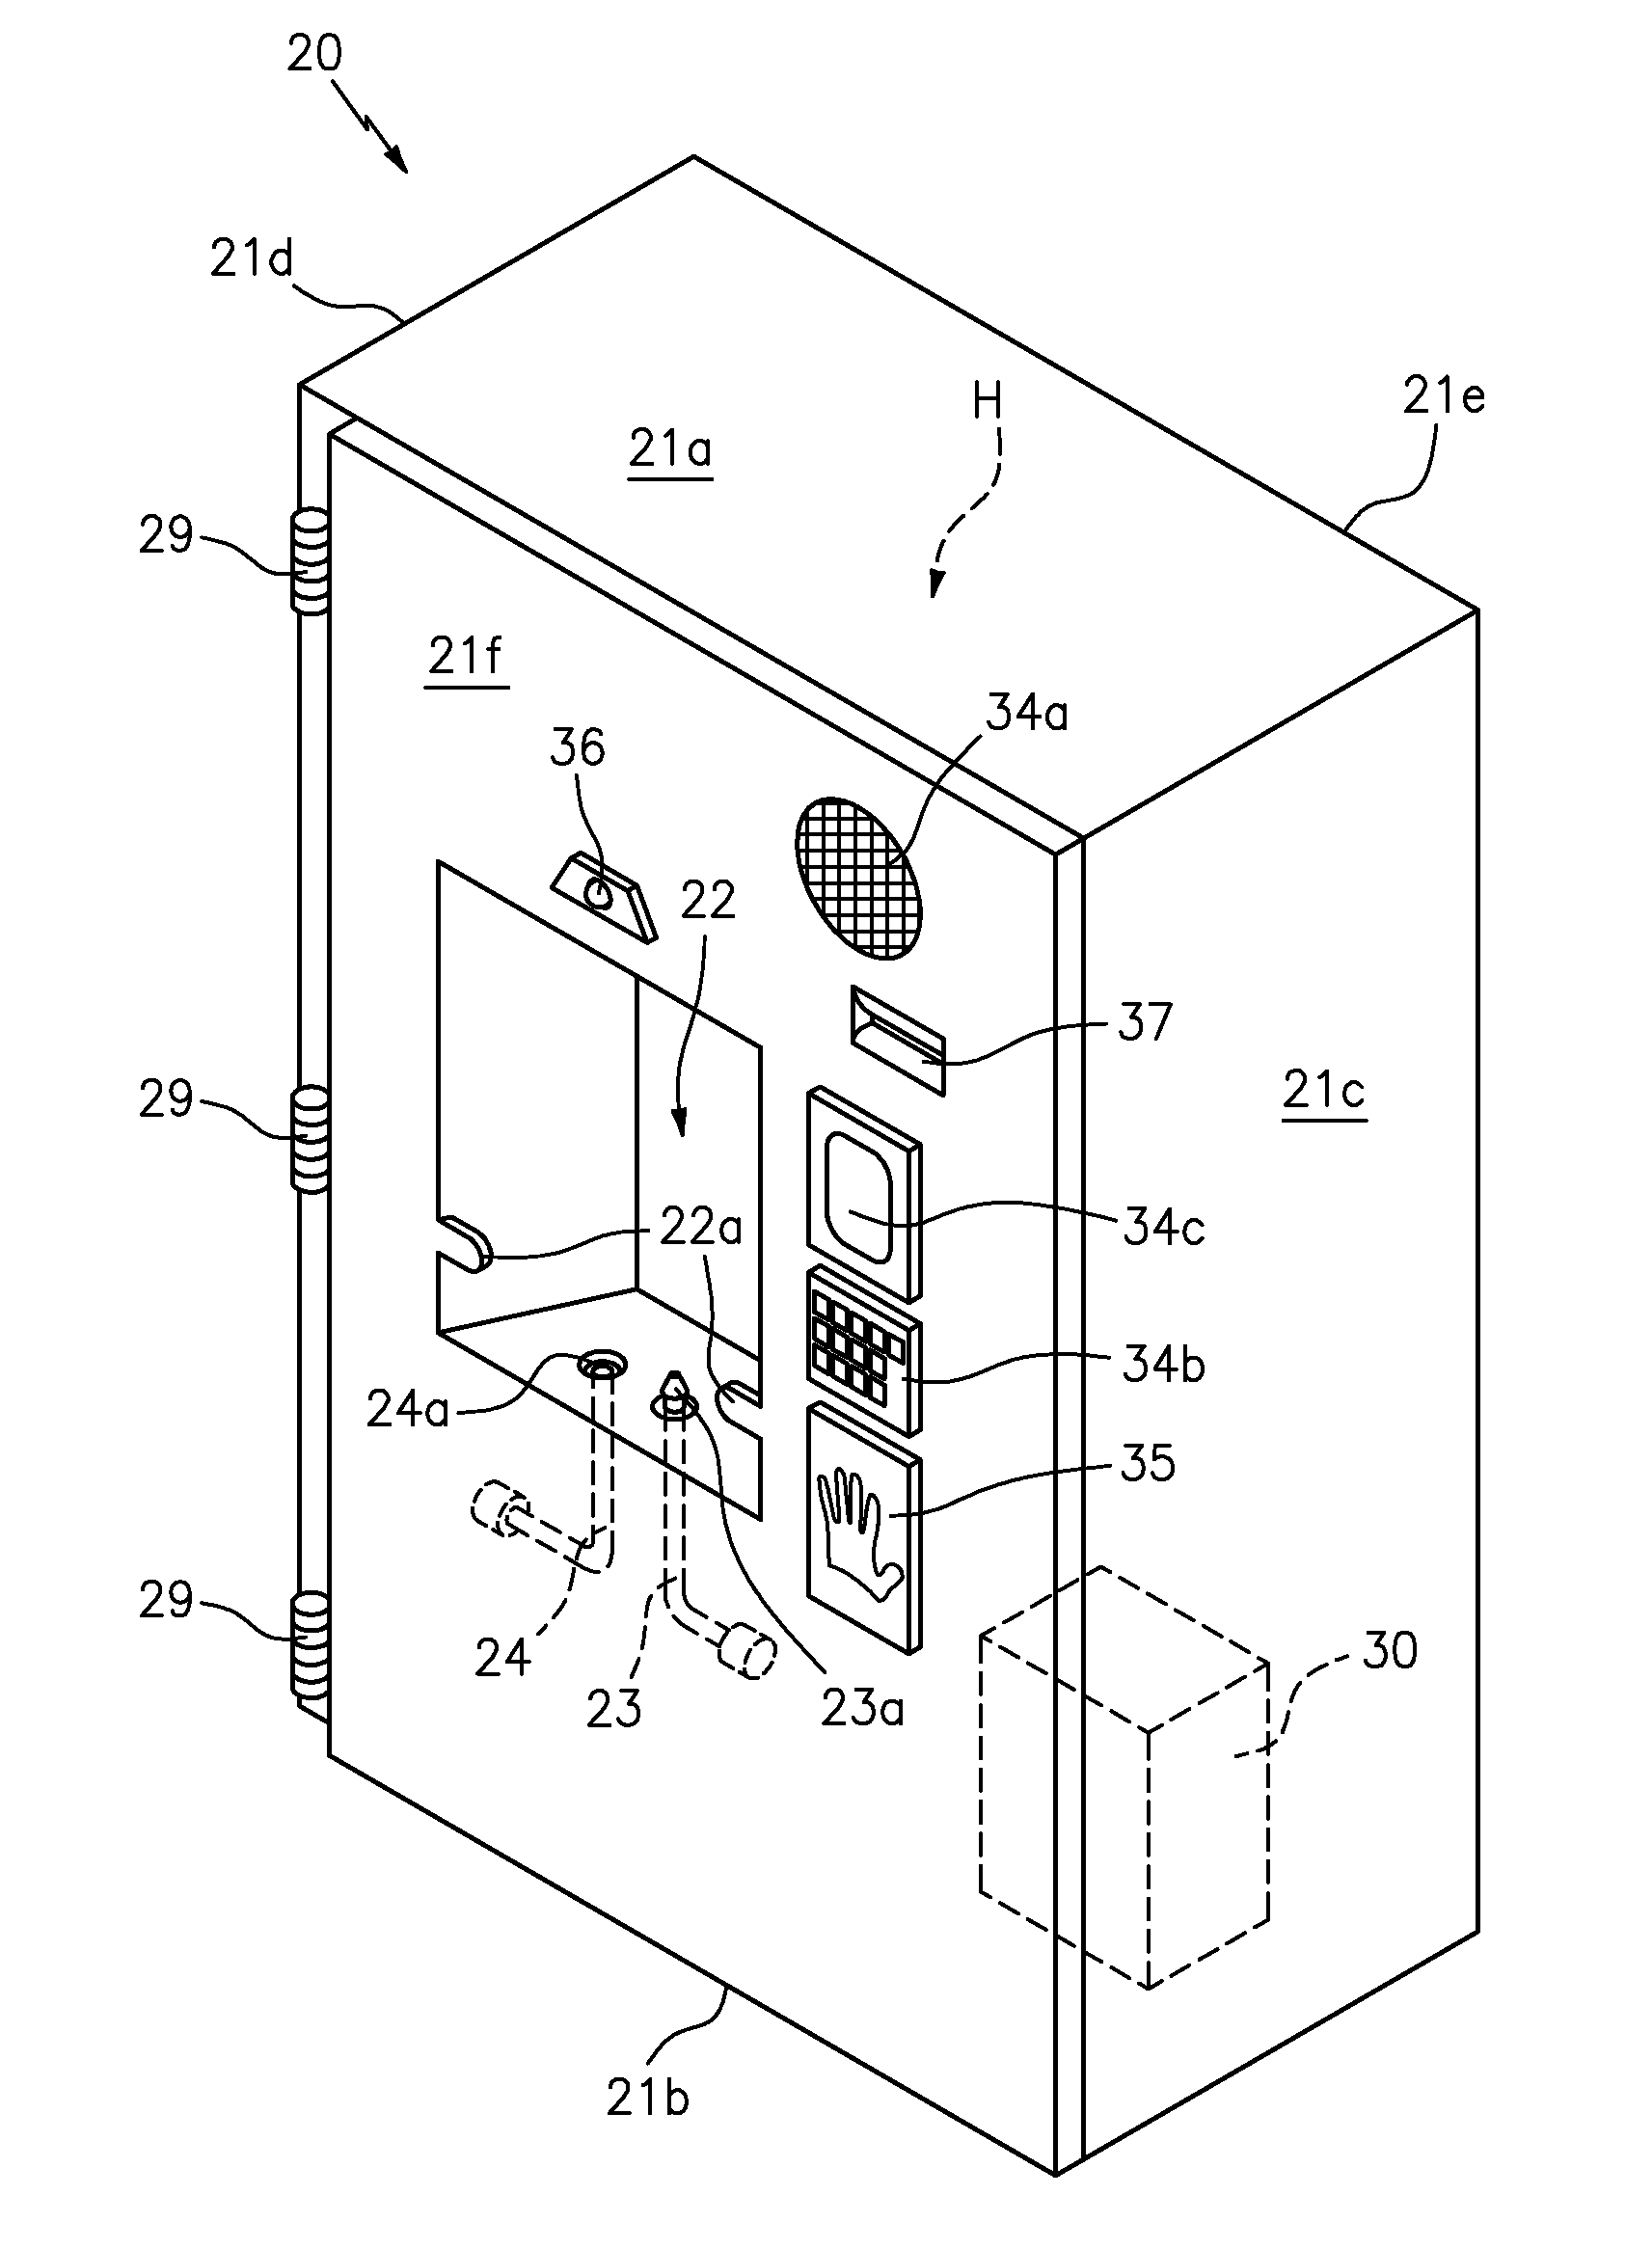 Self service controlled beverage dispensing system